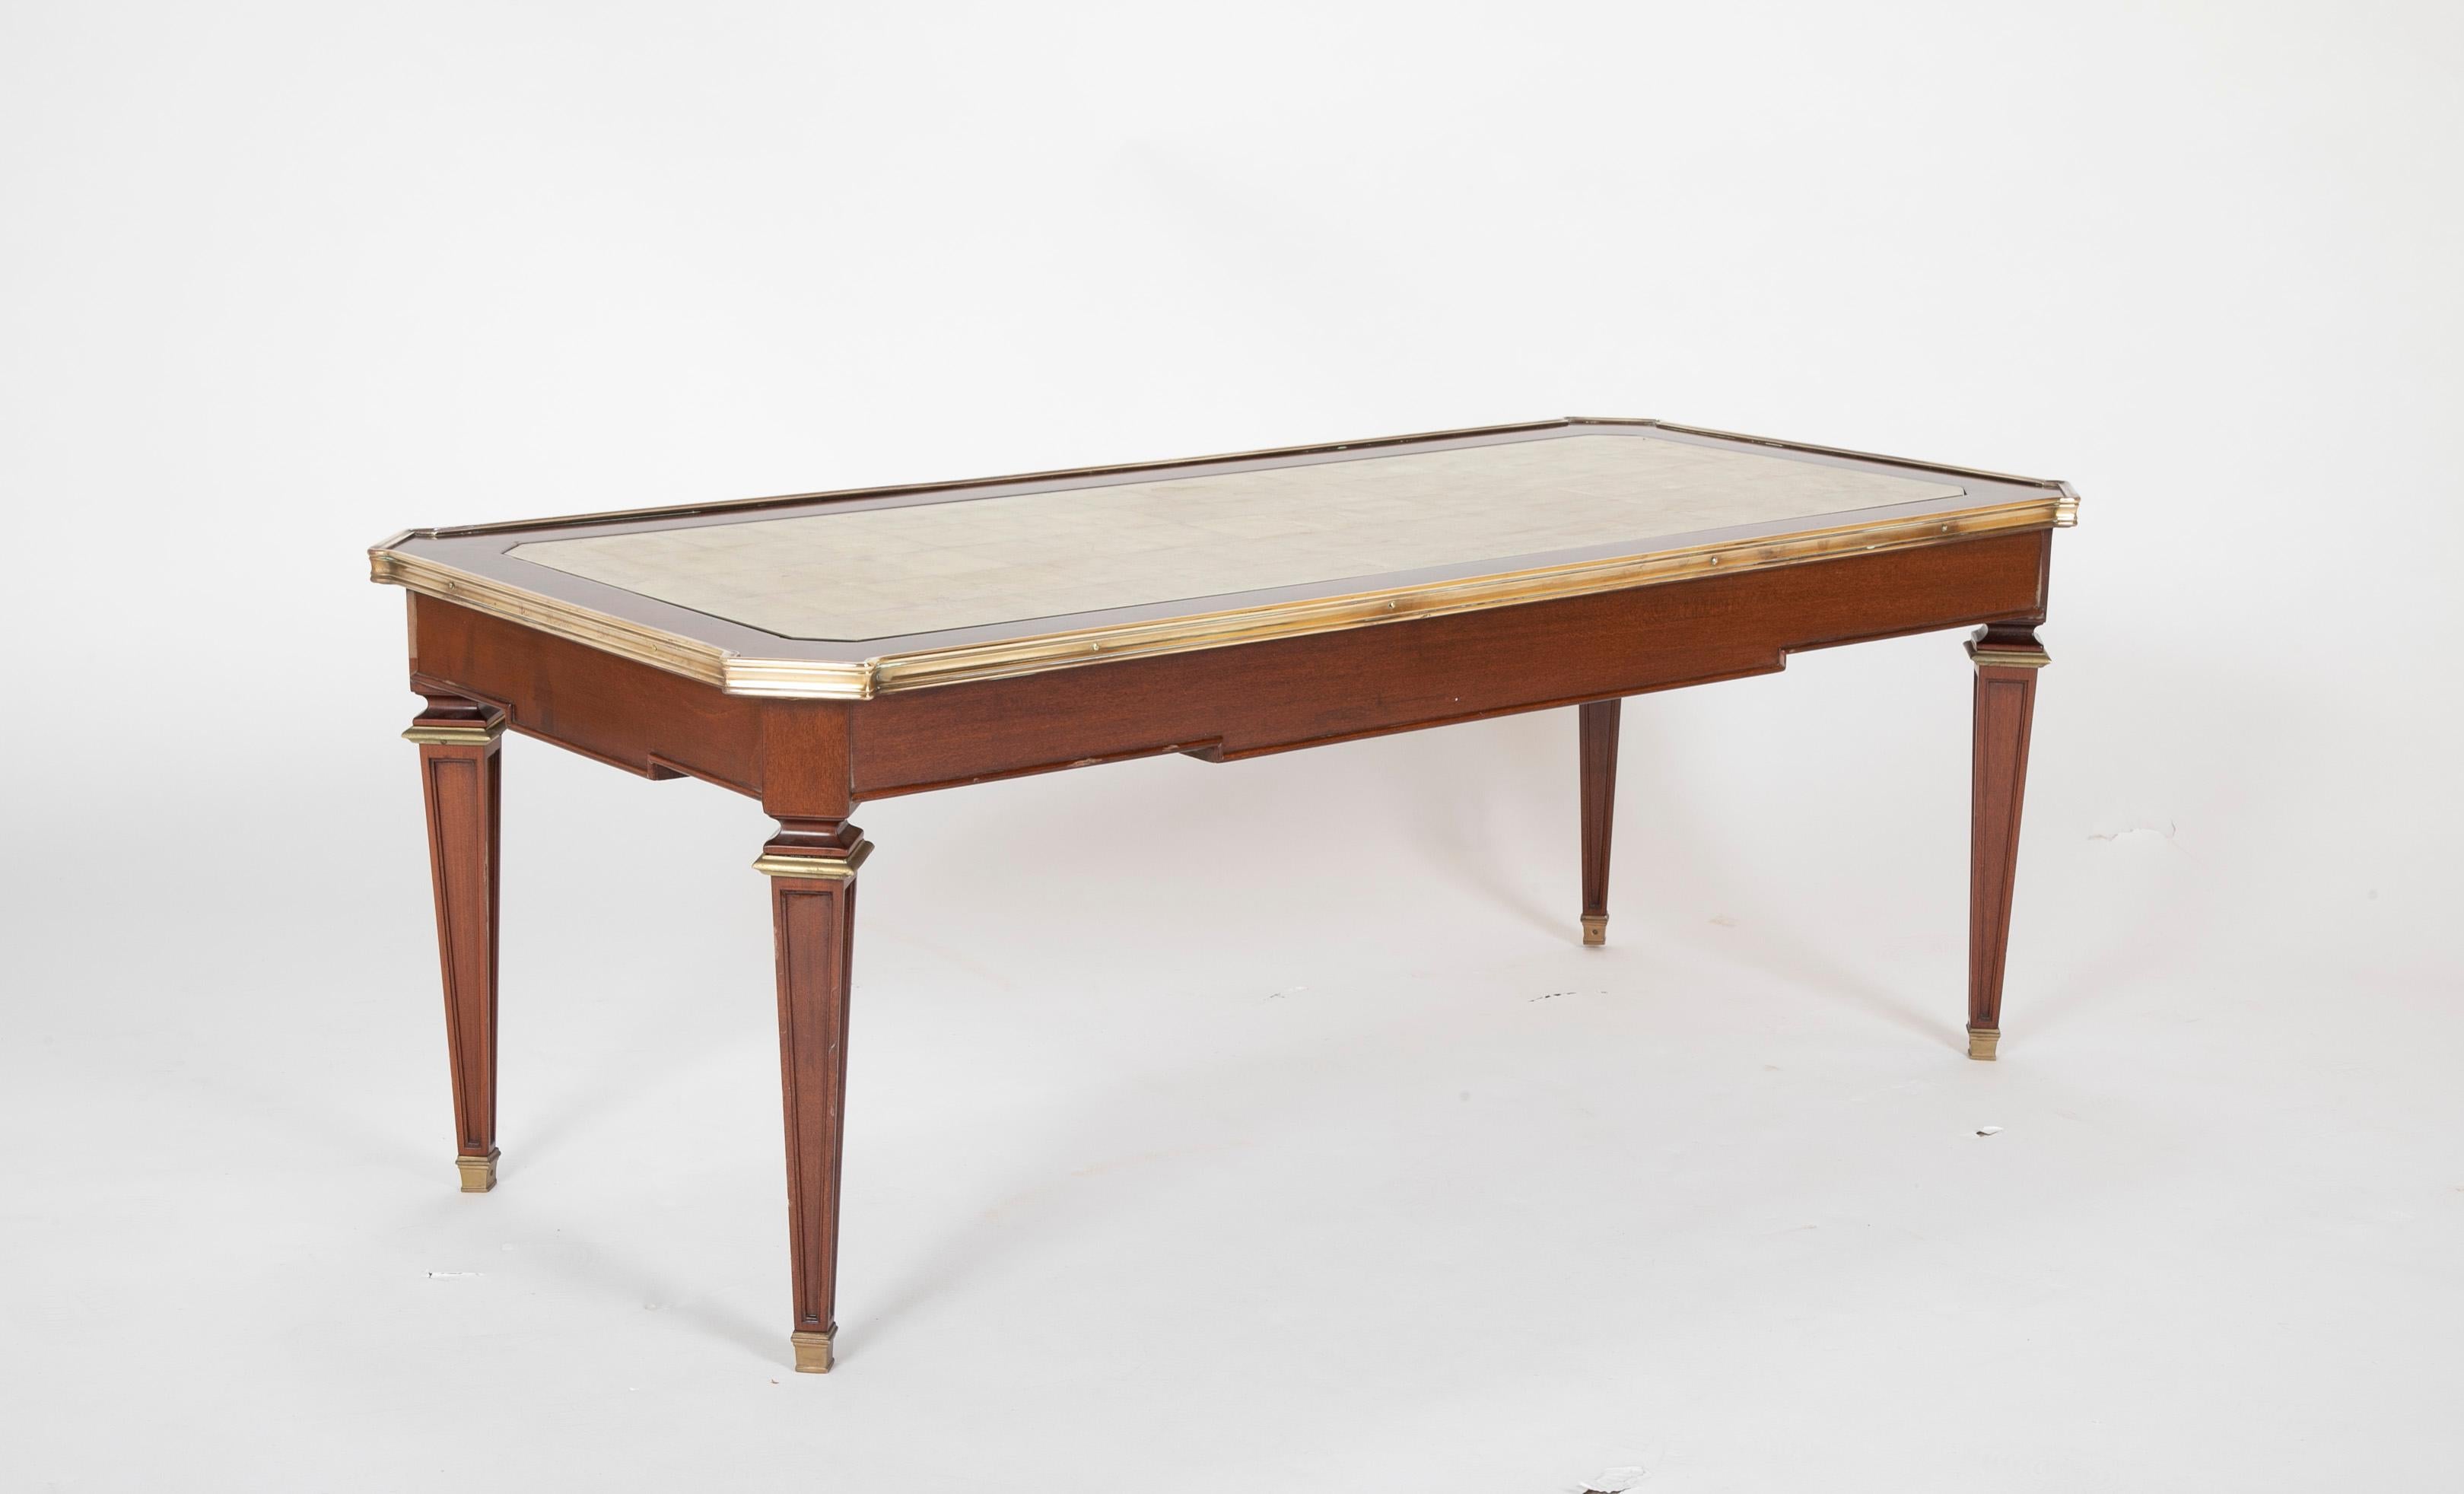 A graceful and stylish French mahogany coffee or cocktail table with bronze mounts and feet and an exquisite gold leafed glass inset top. A modern, elegant midcentury interpretation of the Louis XVI style by Maison Jansen, Paris.

Provenance: